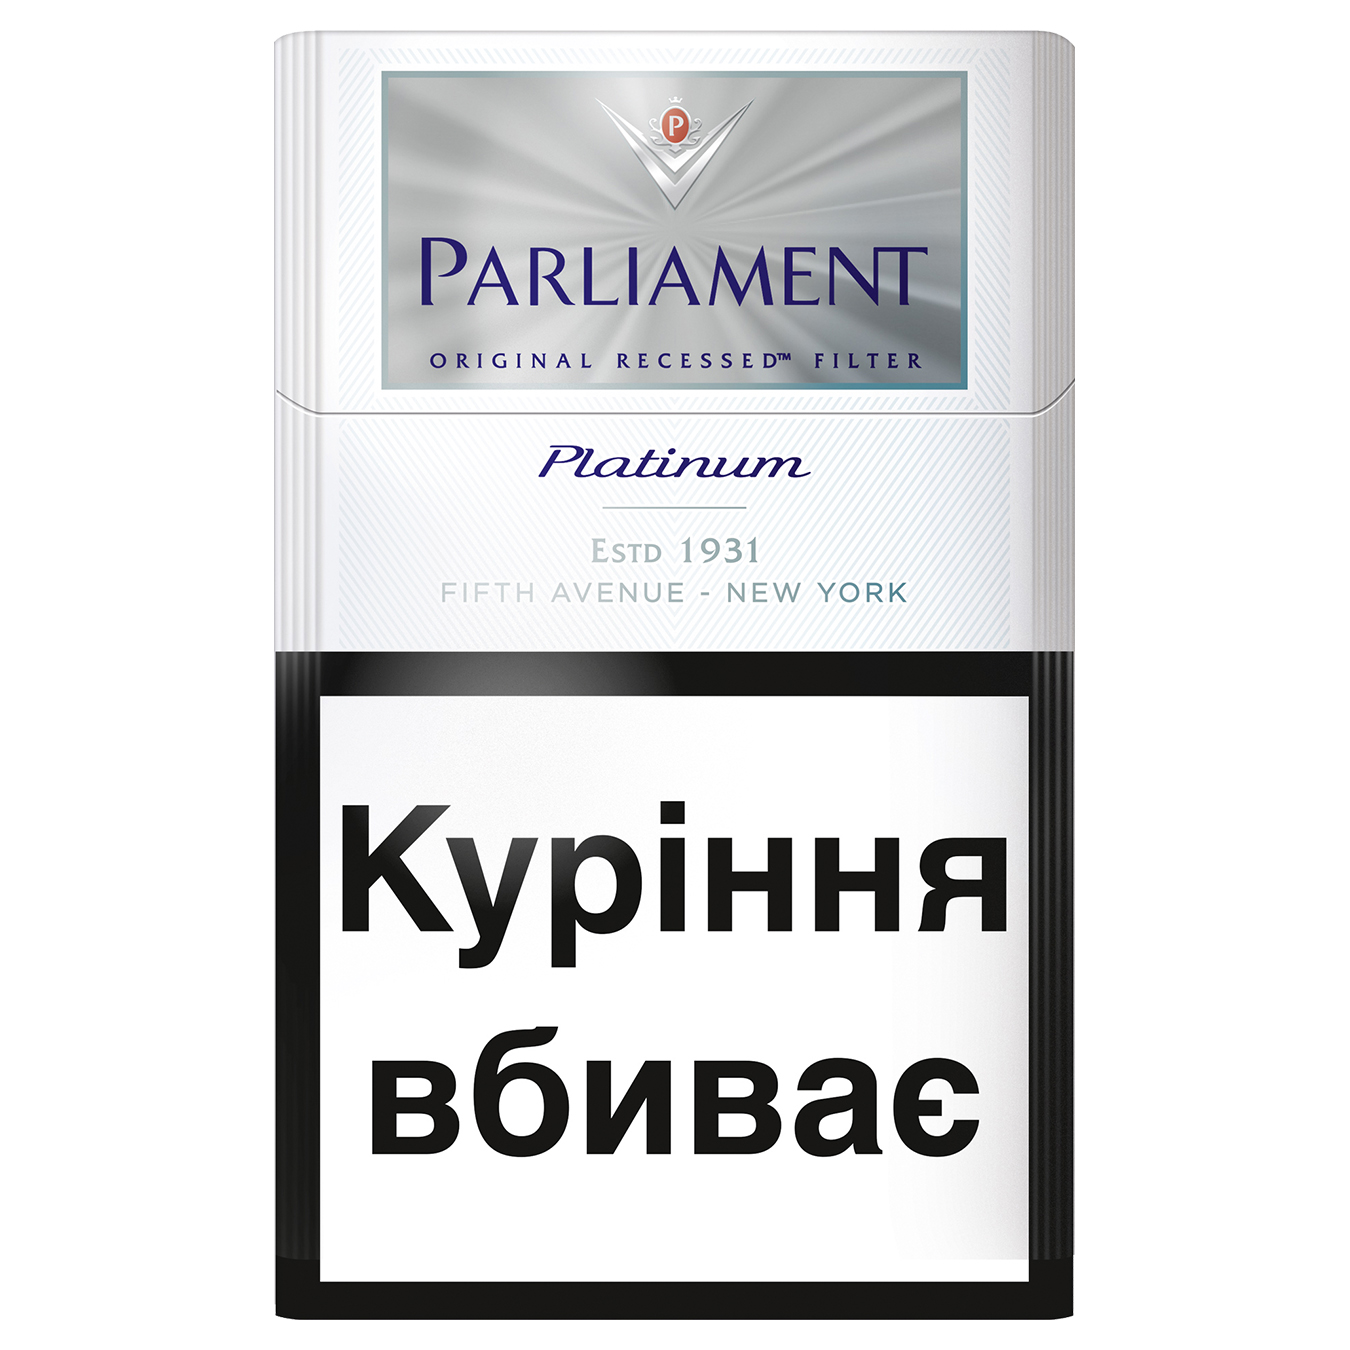 Parliament Platinum Cigarettes (the price is indicated without excise tax)